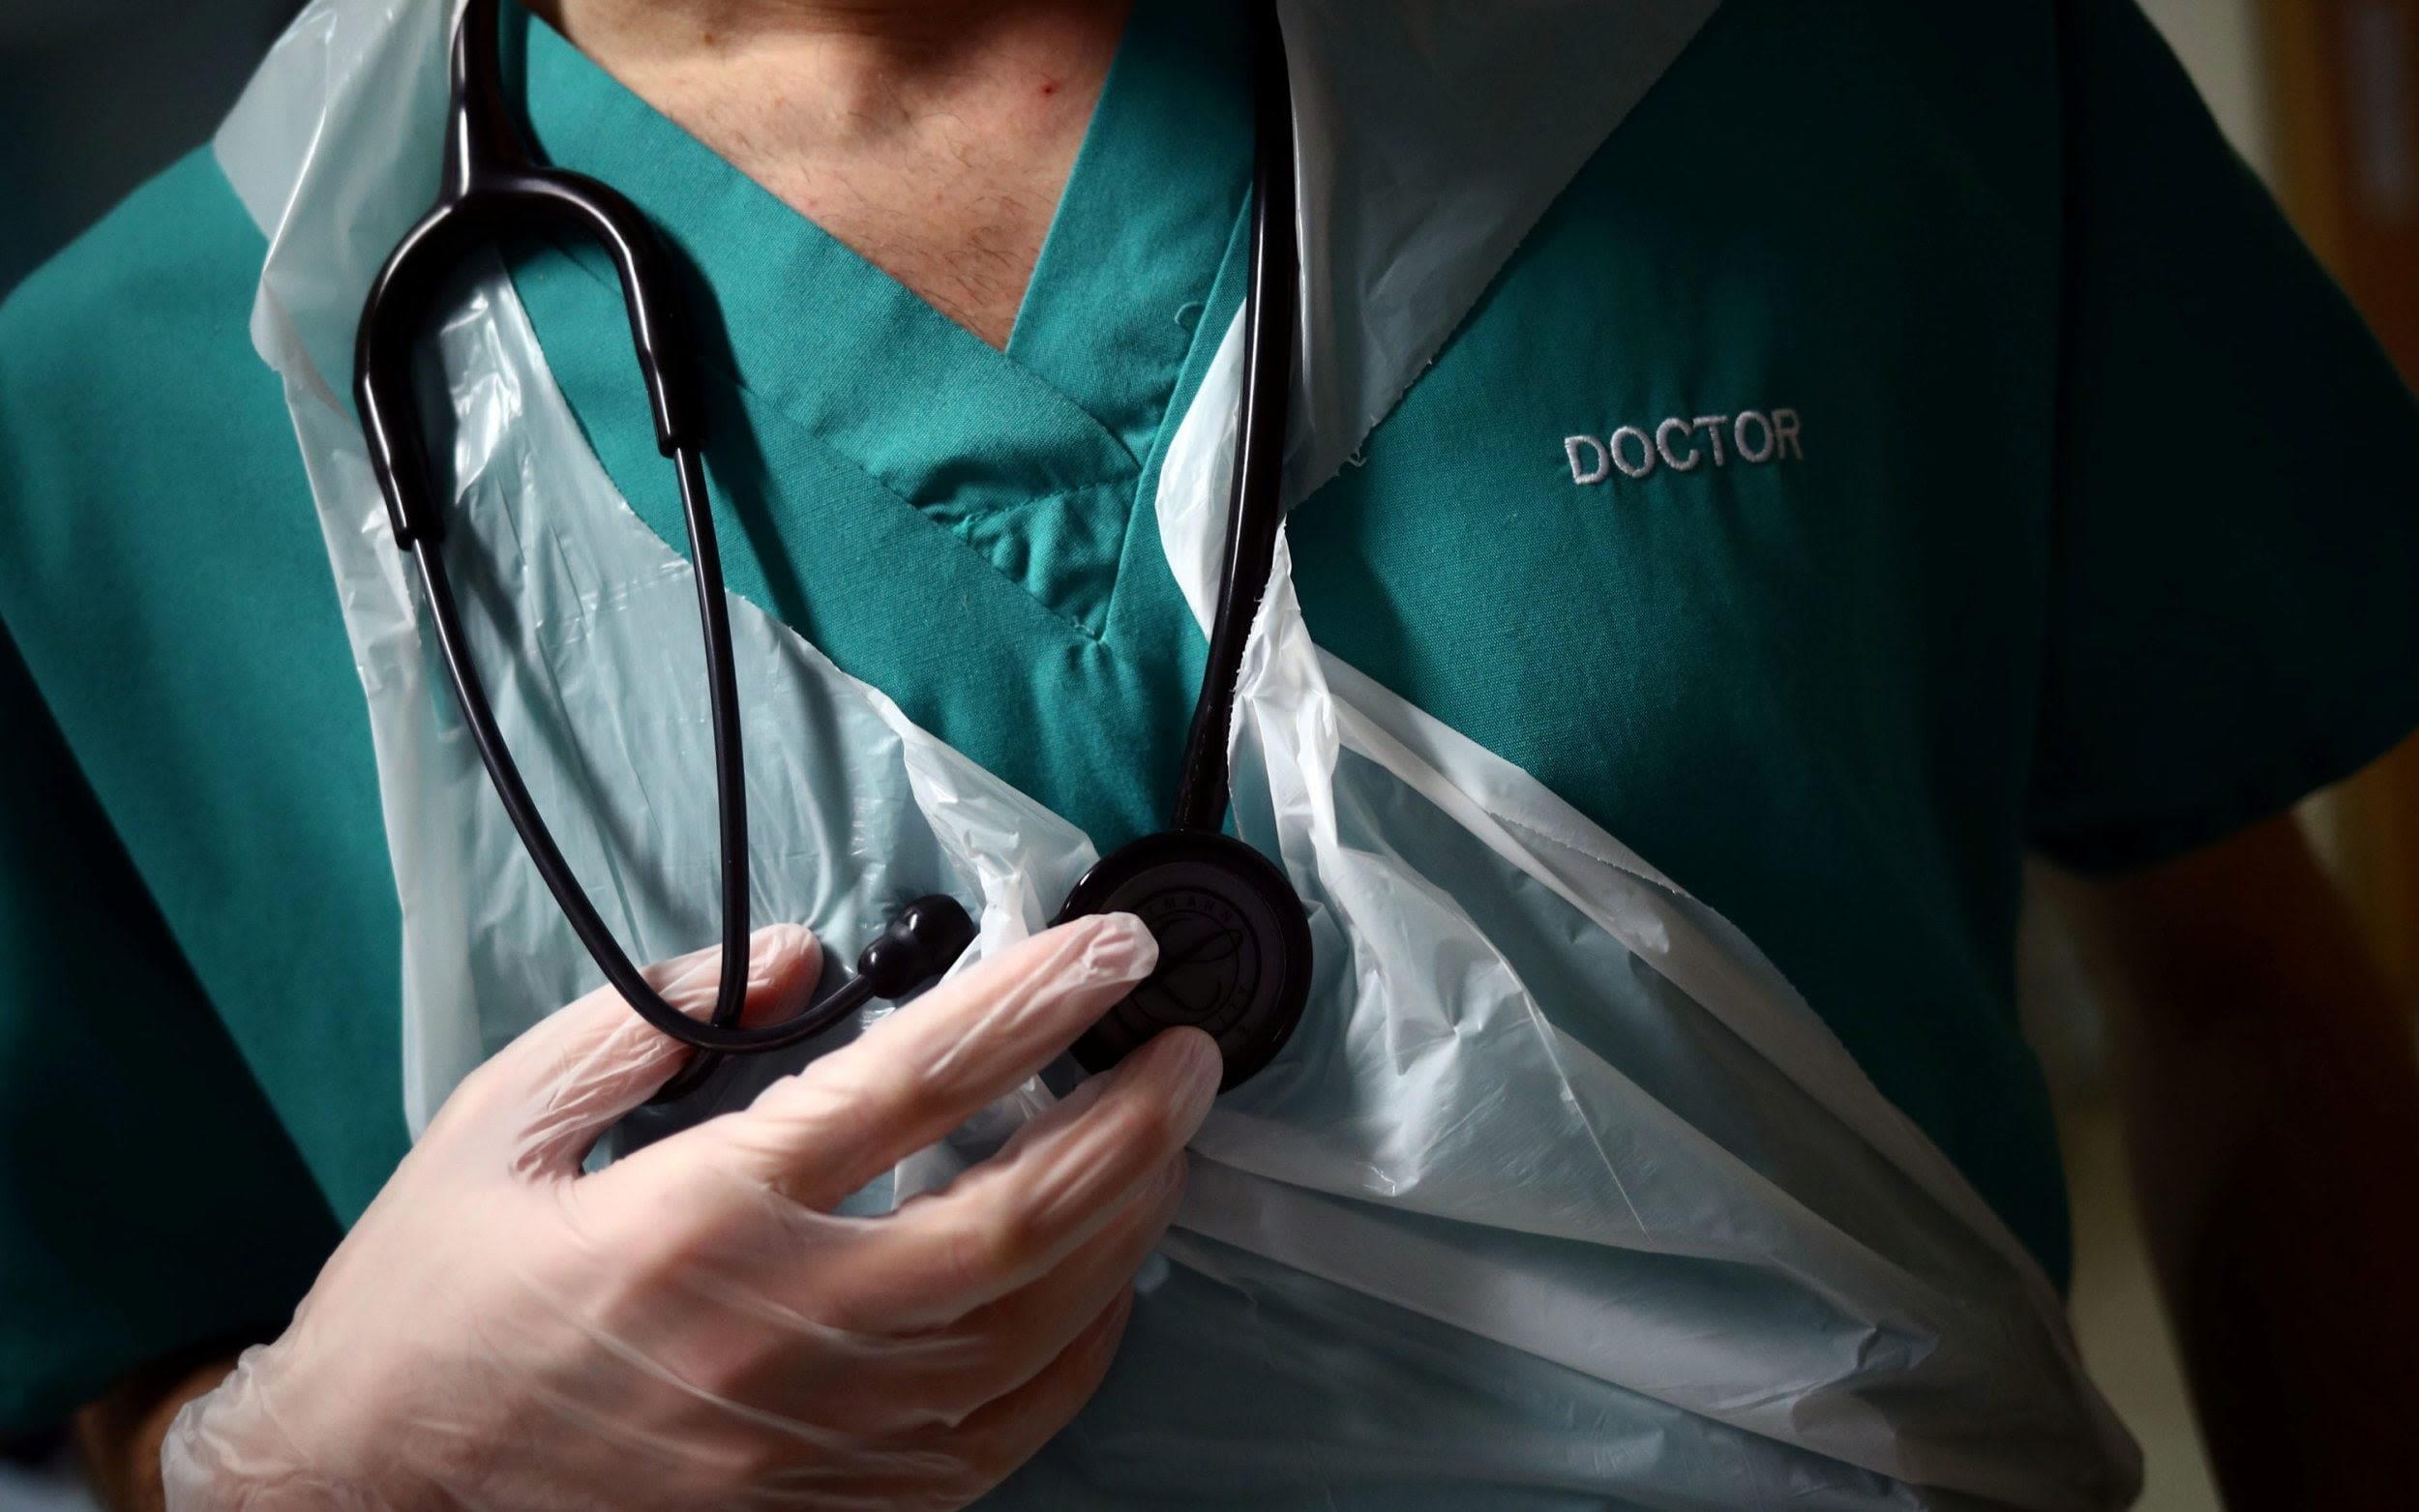 Top NHS doctors failing to claim pension pay worth more than £40,000 a year